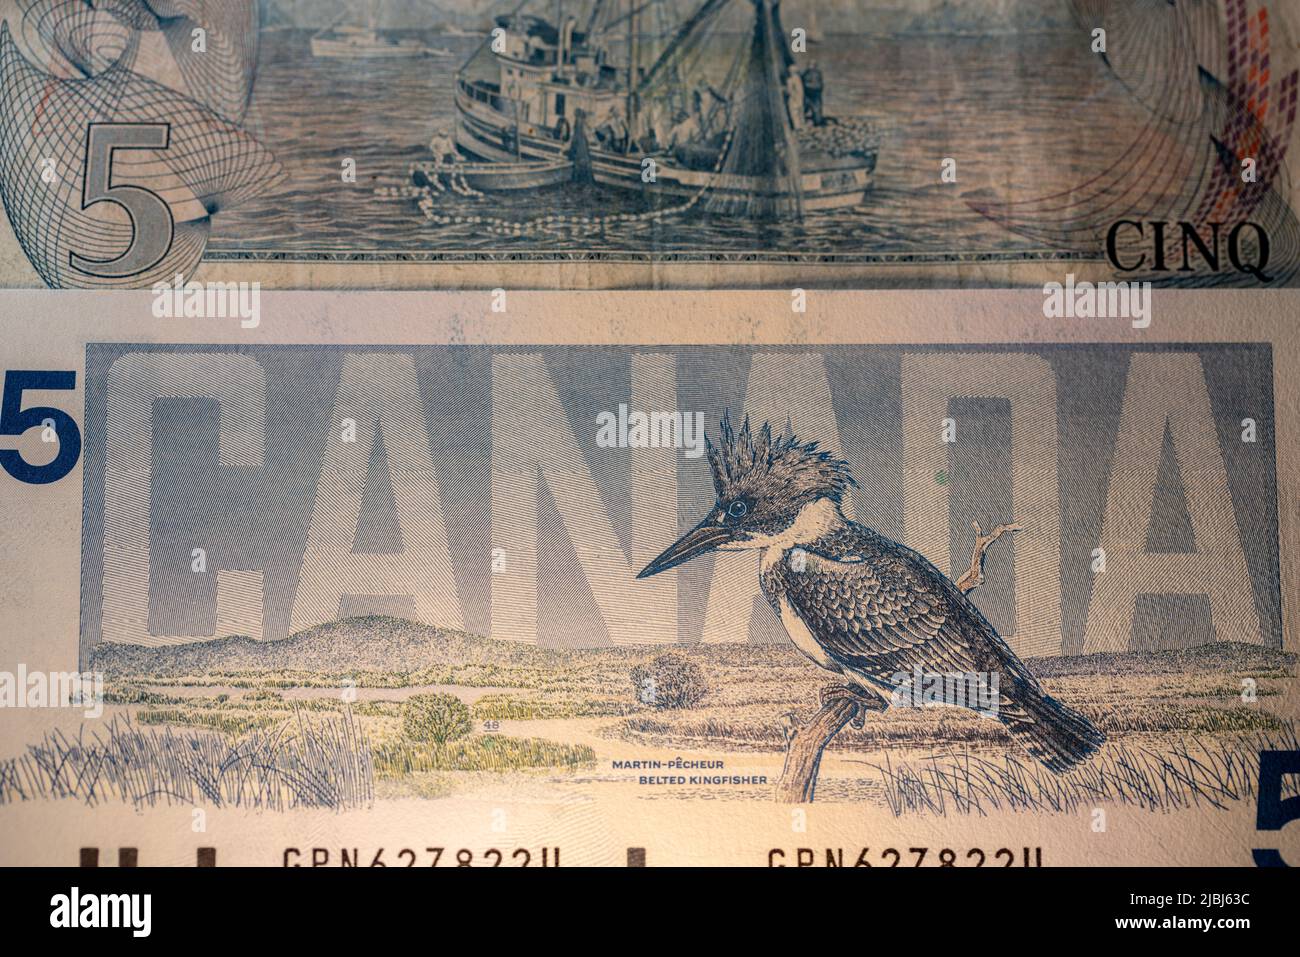 Toronto, Canada - October 30. 2021: Five canadian Dollar banknotes, scenes of Canada and birds of canada. Different designs of CAD bills Stock Photo